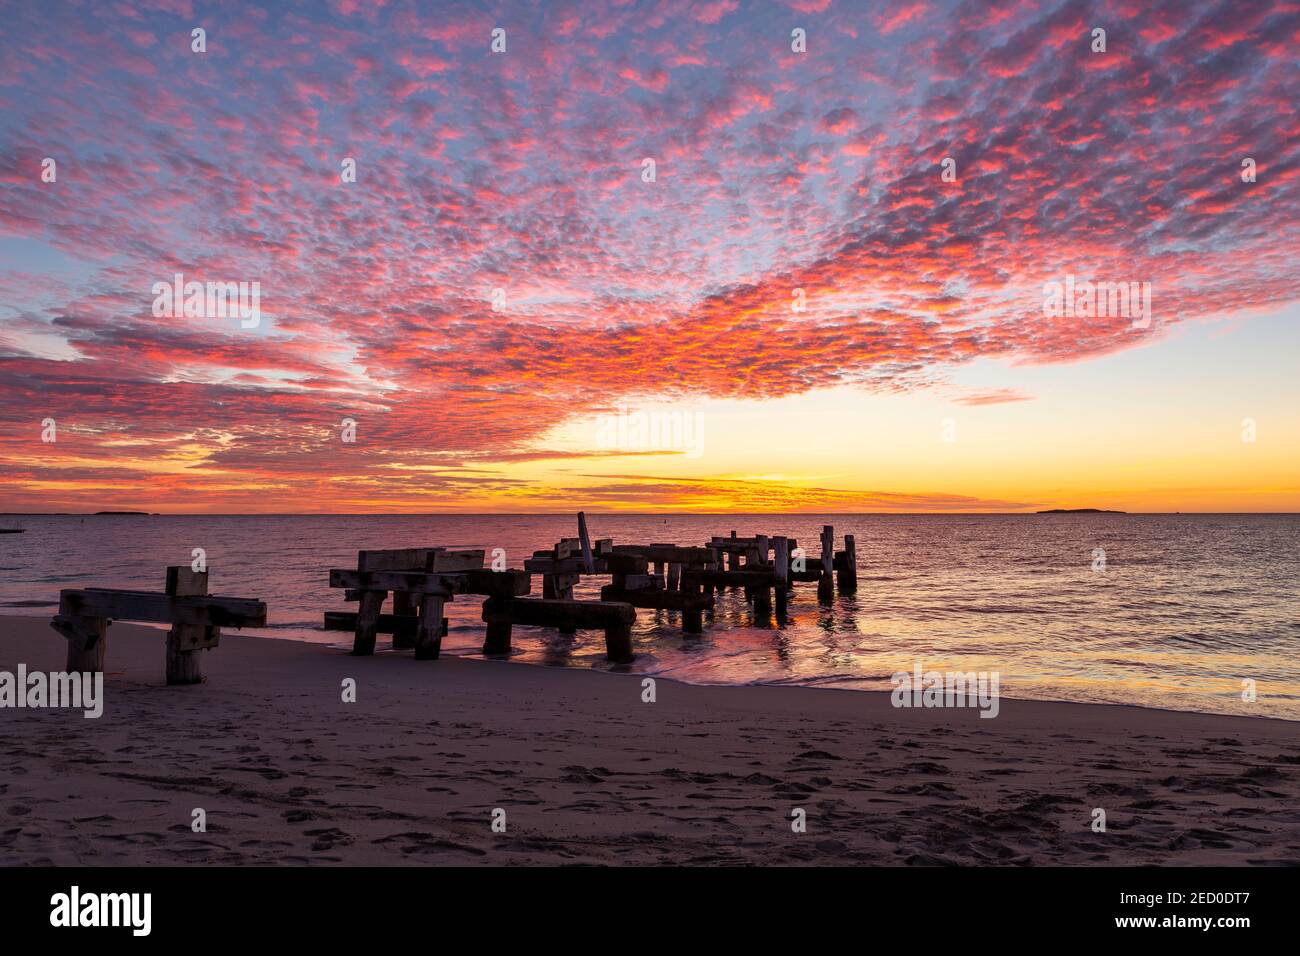 Colourful Cirrocumulus clouds at sunset over Jurien Bay Jetty Stock Photo